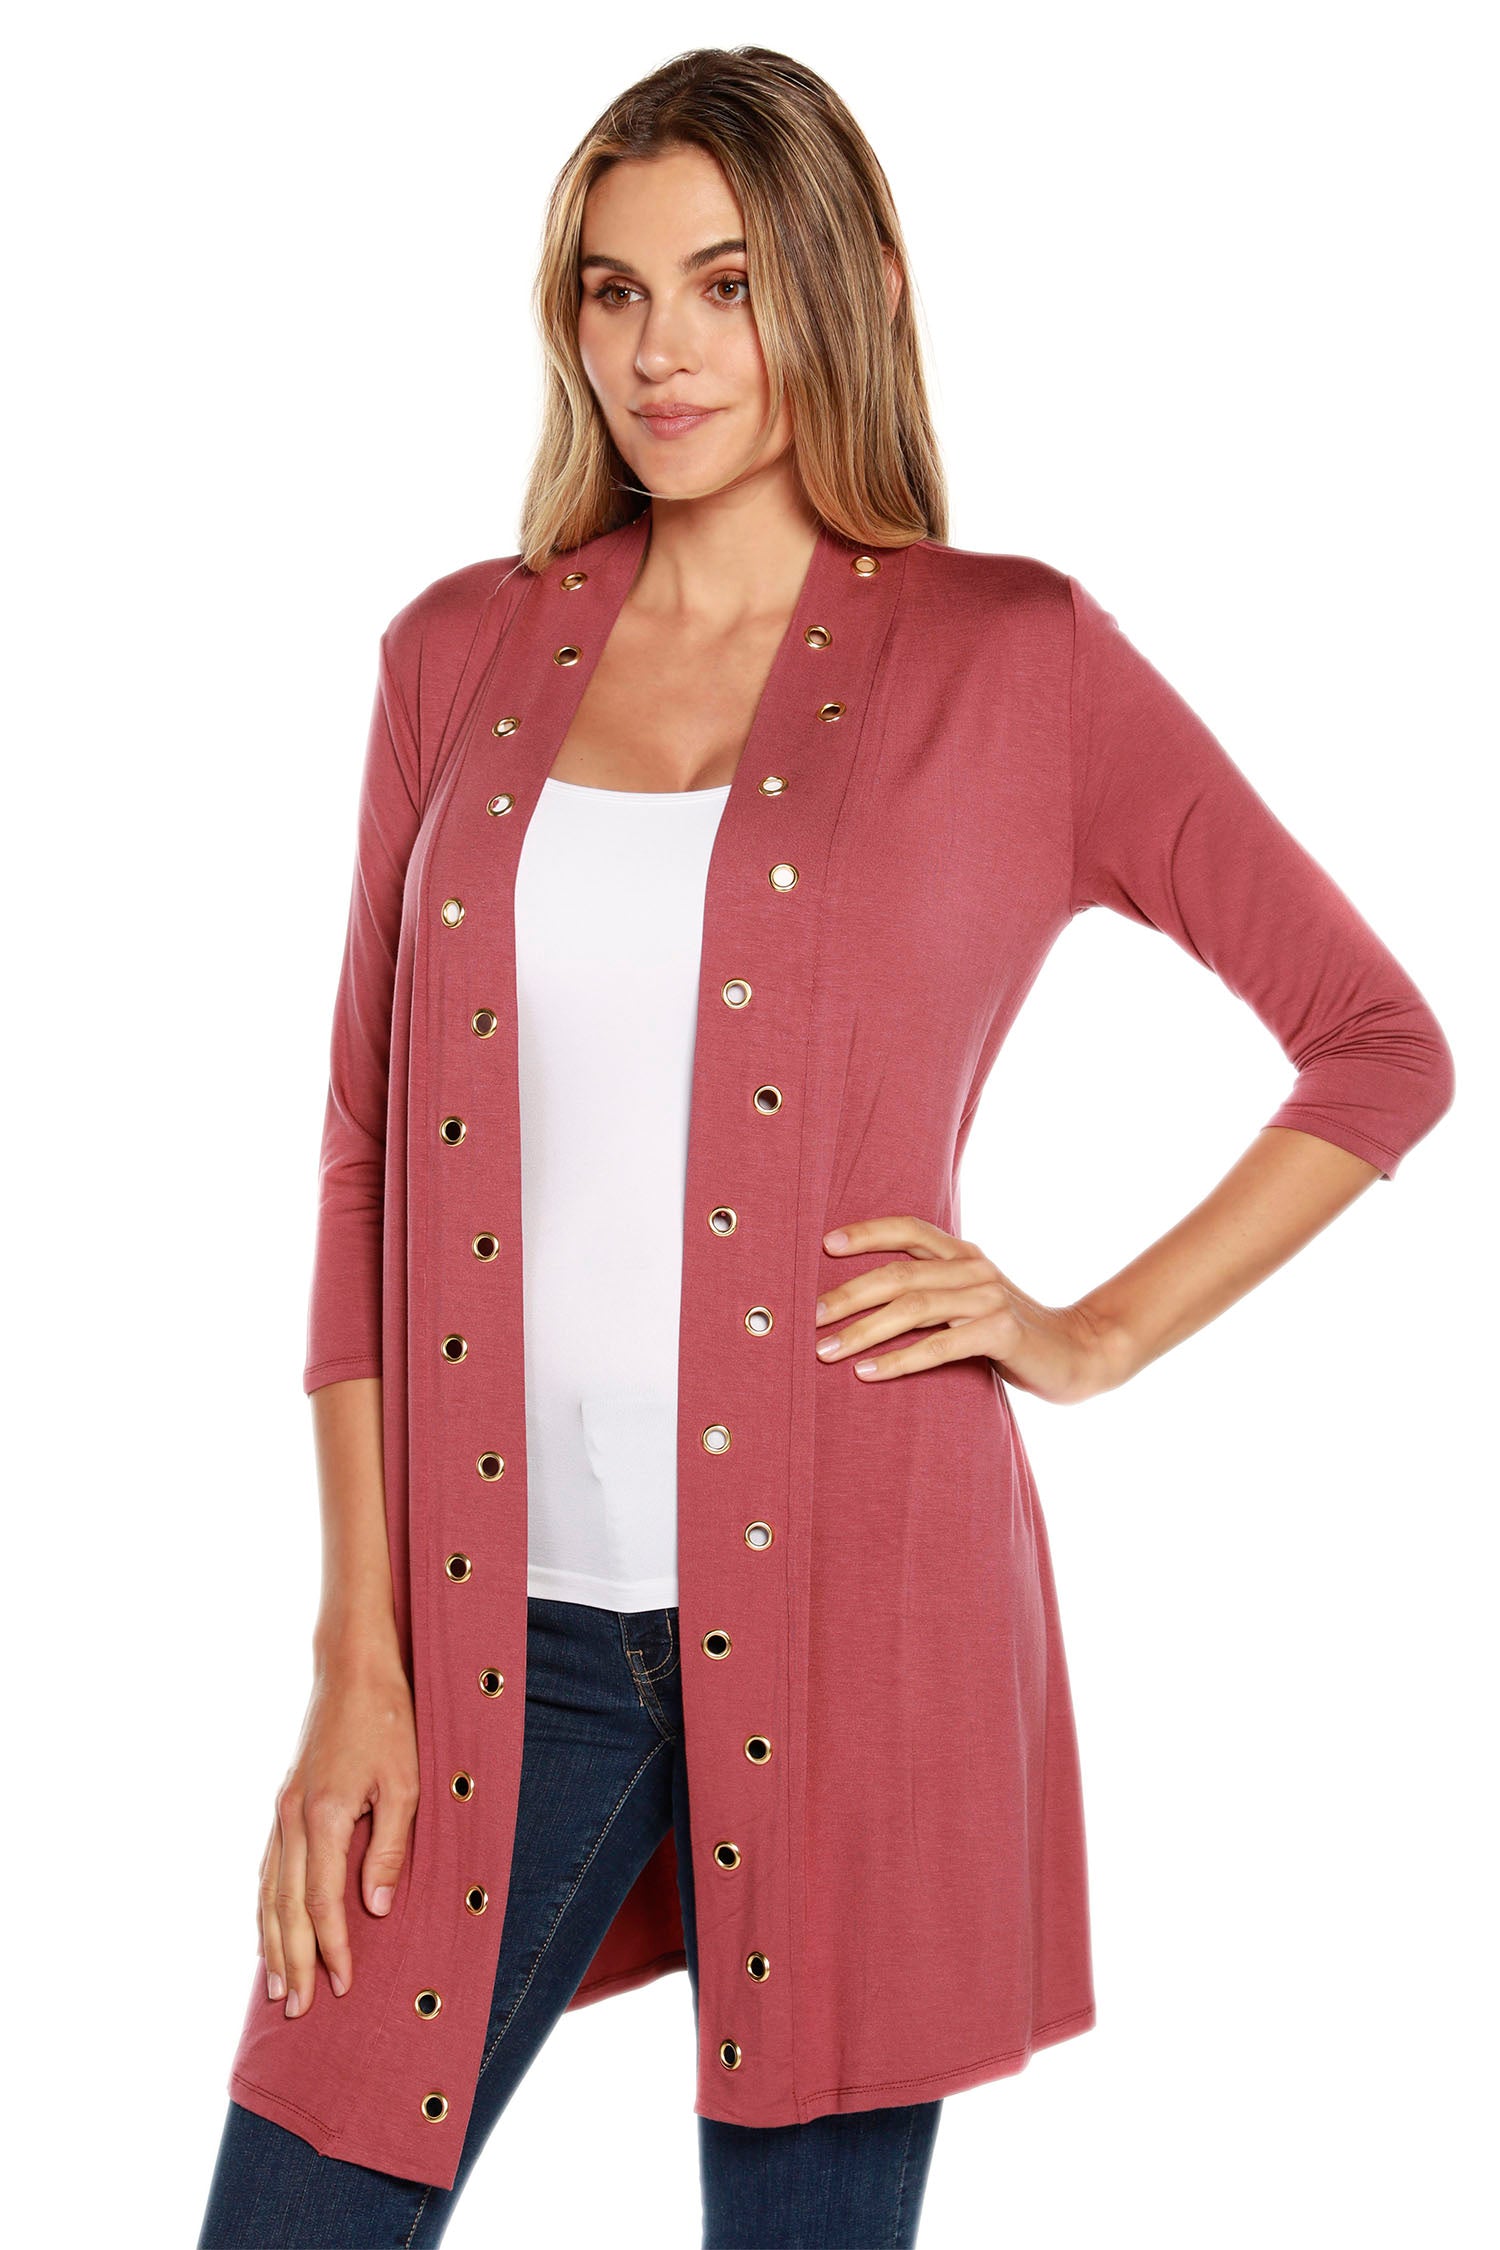 Women's 3/4 Sleeve Mid-Thigh Jersey Cardigan with Gold Grommet Trim